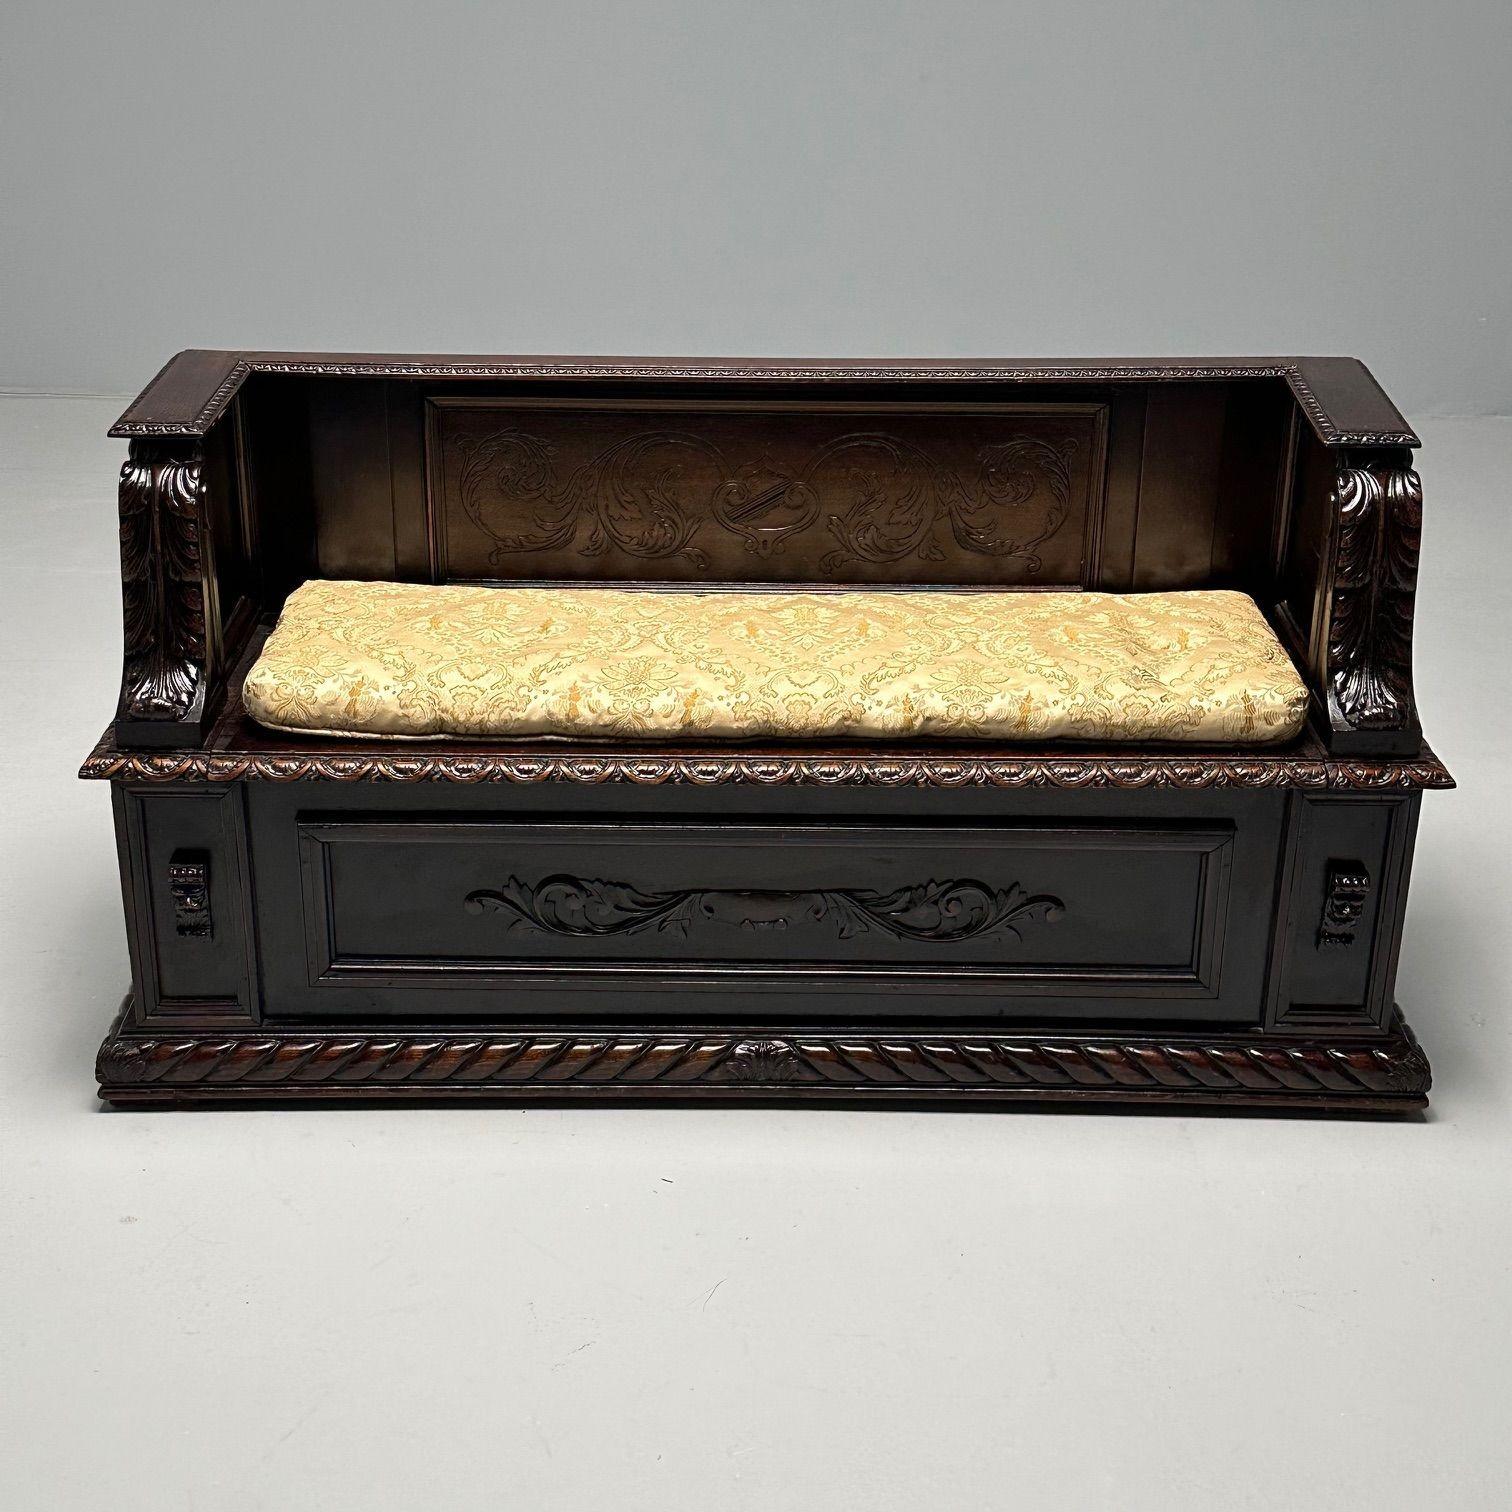 Italian Renaissance, Carved Hall Bench, Cassone, Walnut, Italy, 19th Century

A wonderfully carved Hall Bench or Truck, Linen Chest. The whole carved with grapes and pears hanging on the vine. Each level has scalloped carved edges. The top flips